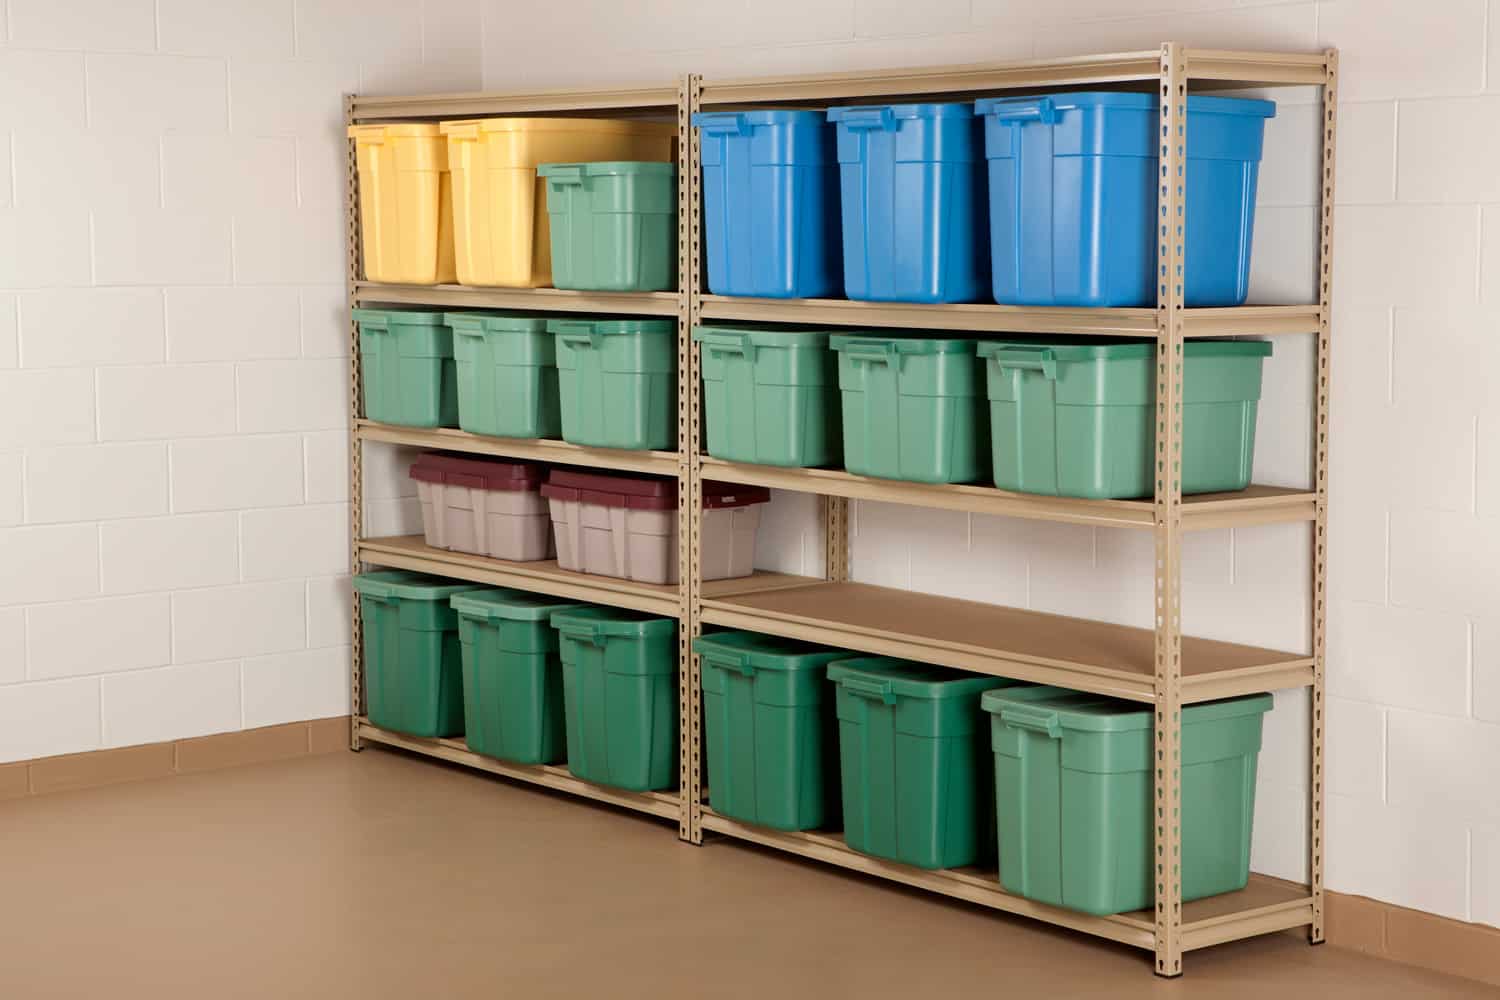 Storage Containers on Shelf 